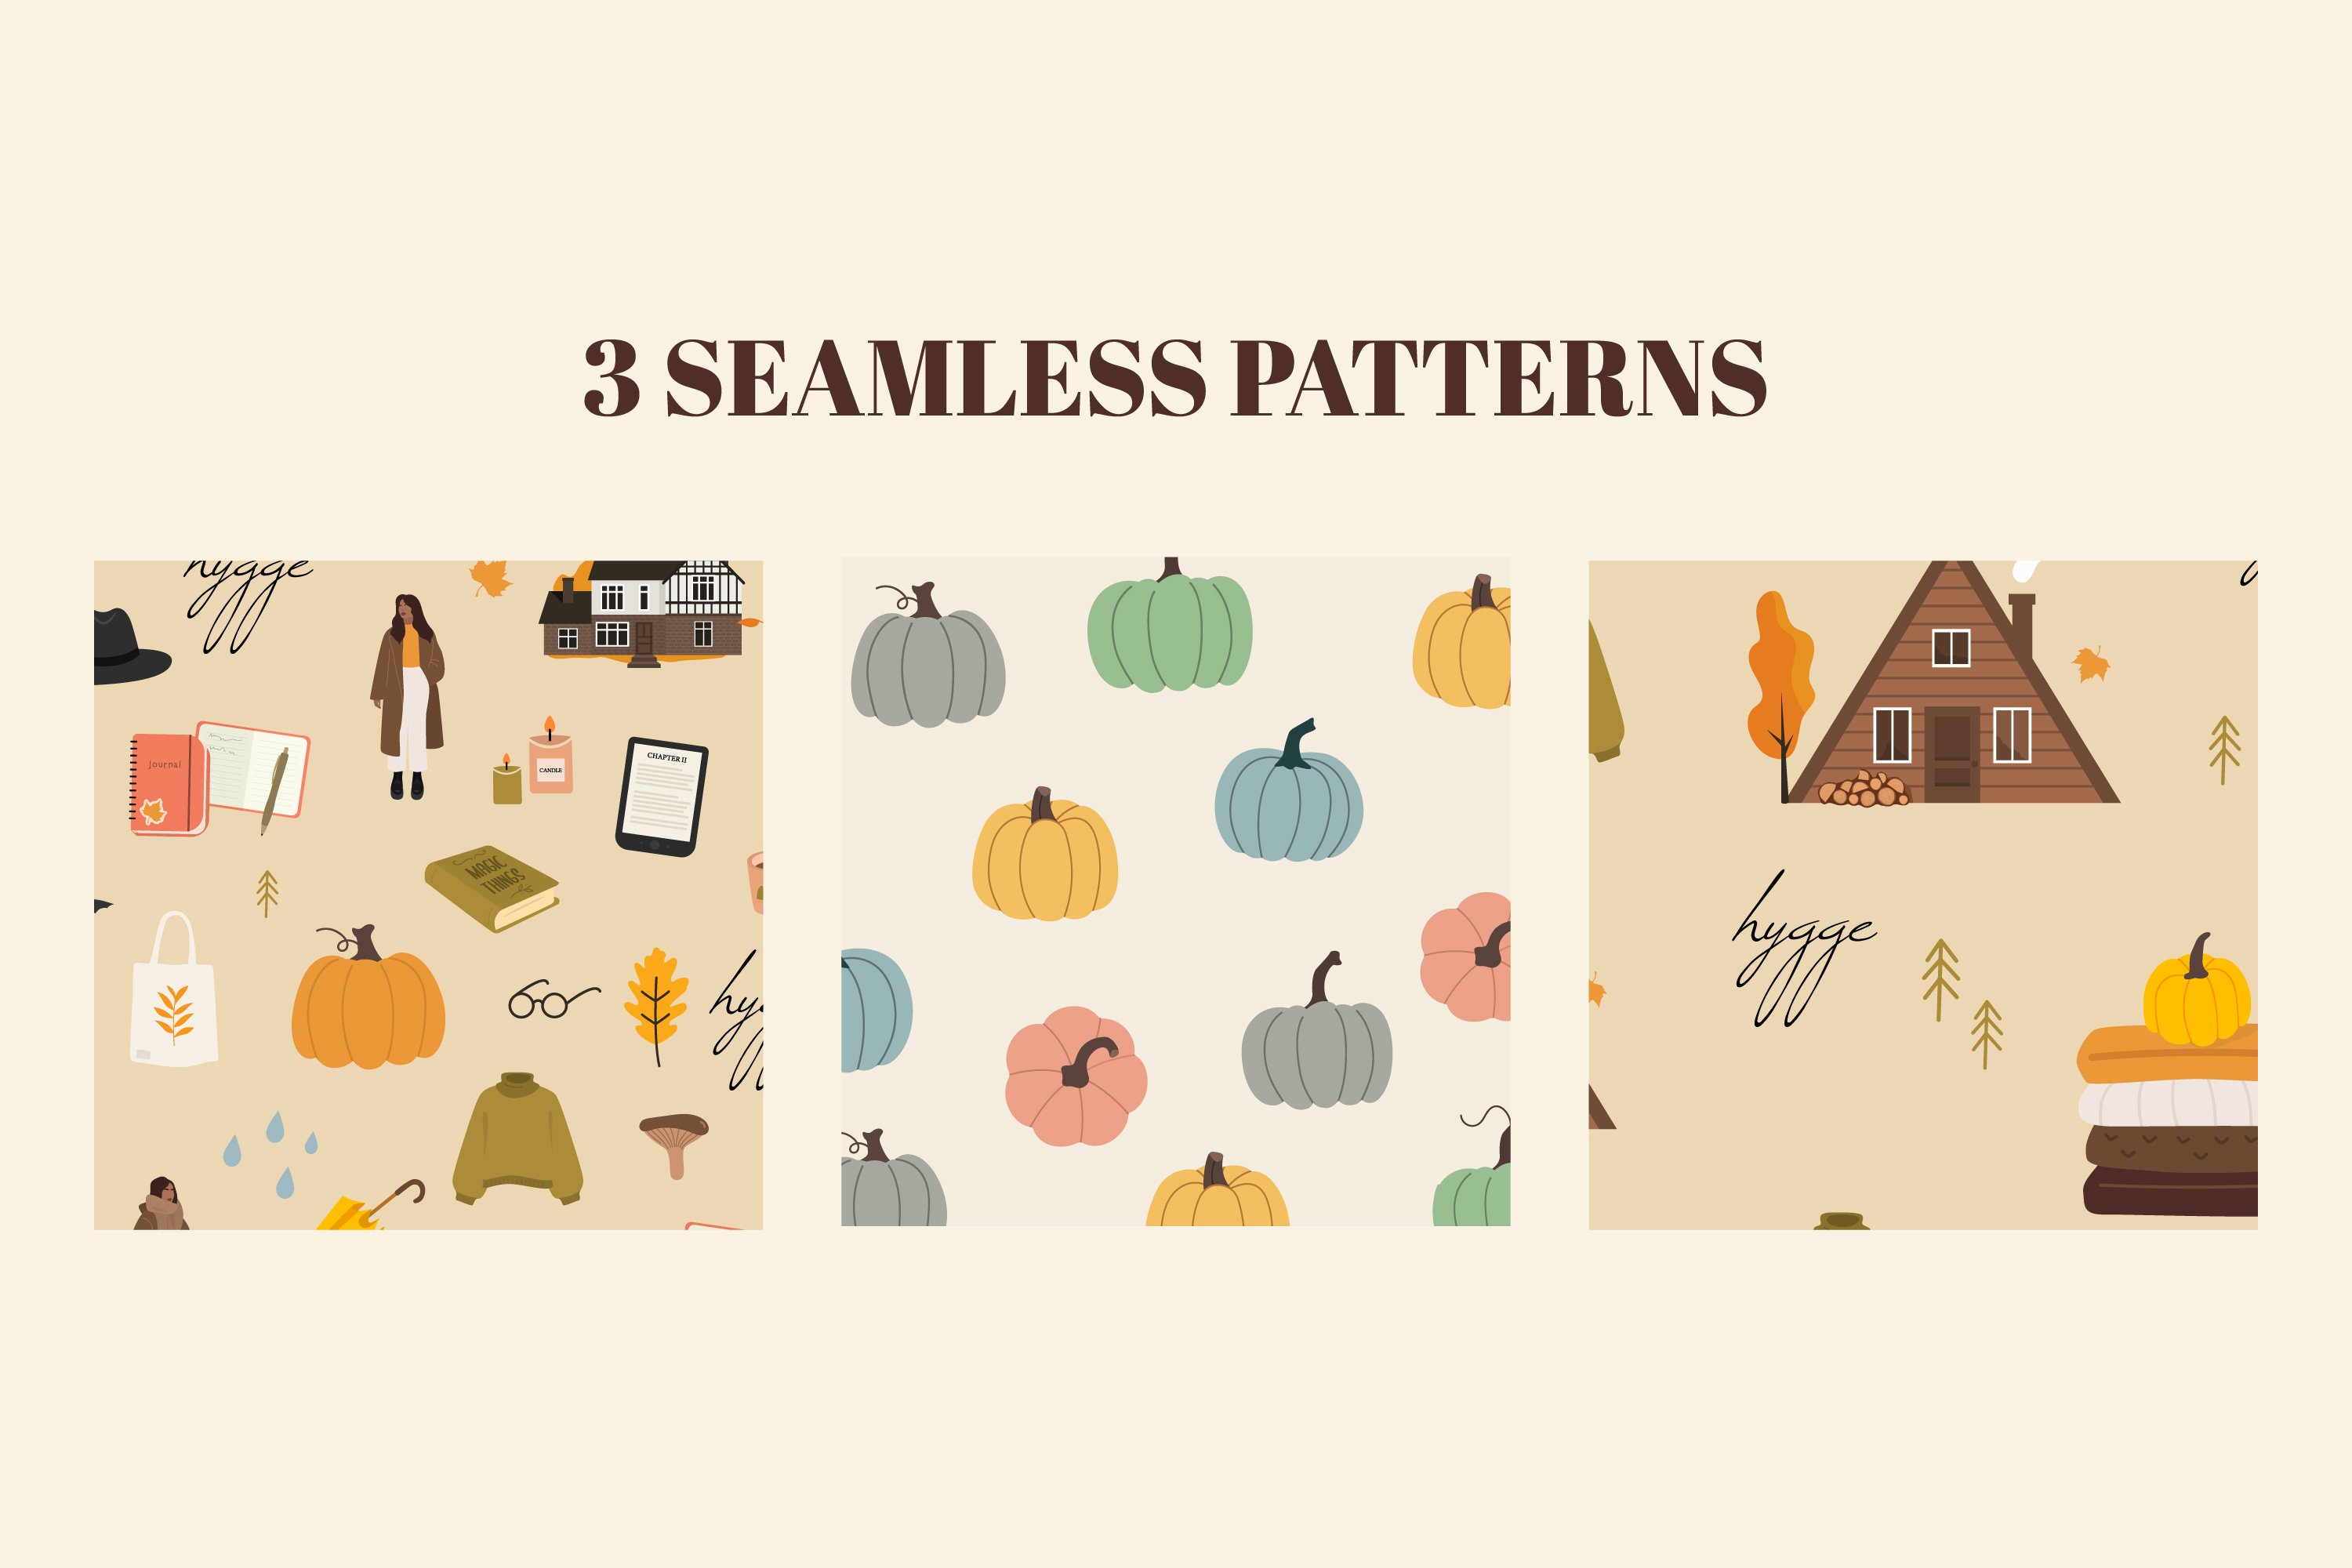 Autumn patterns with different prints.